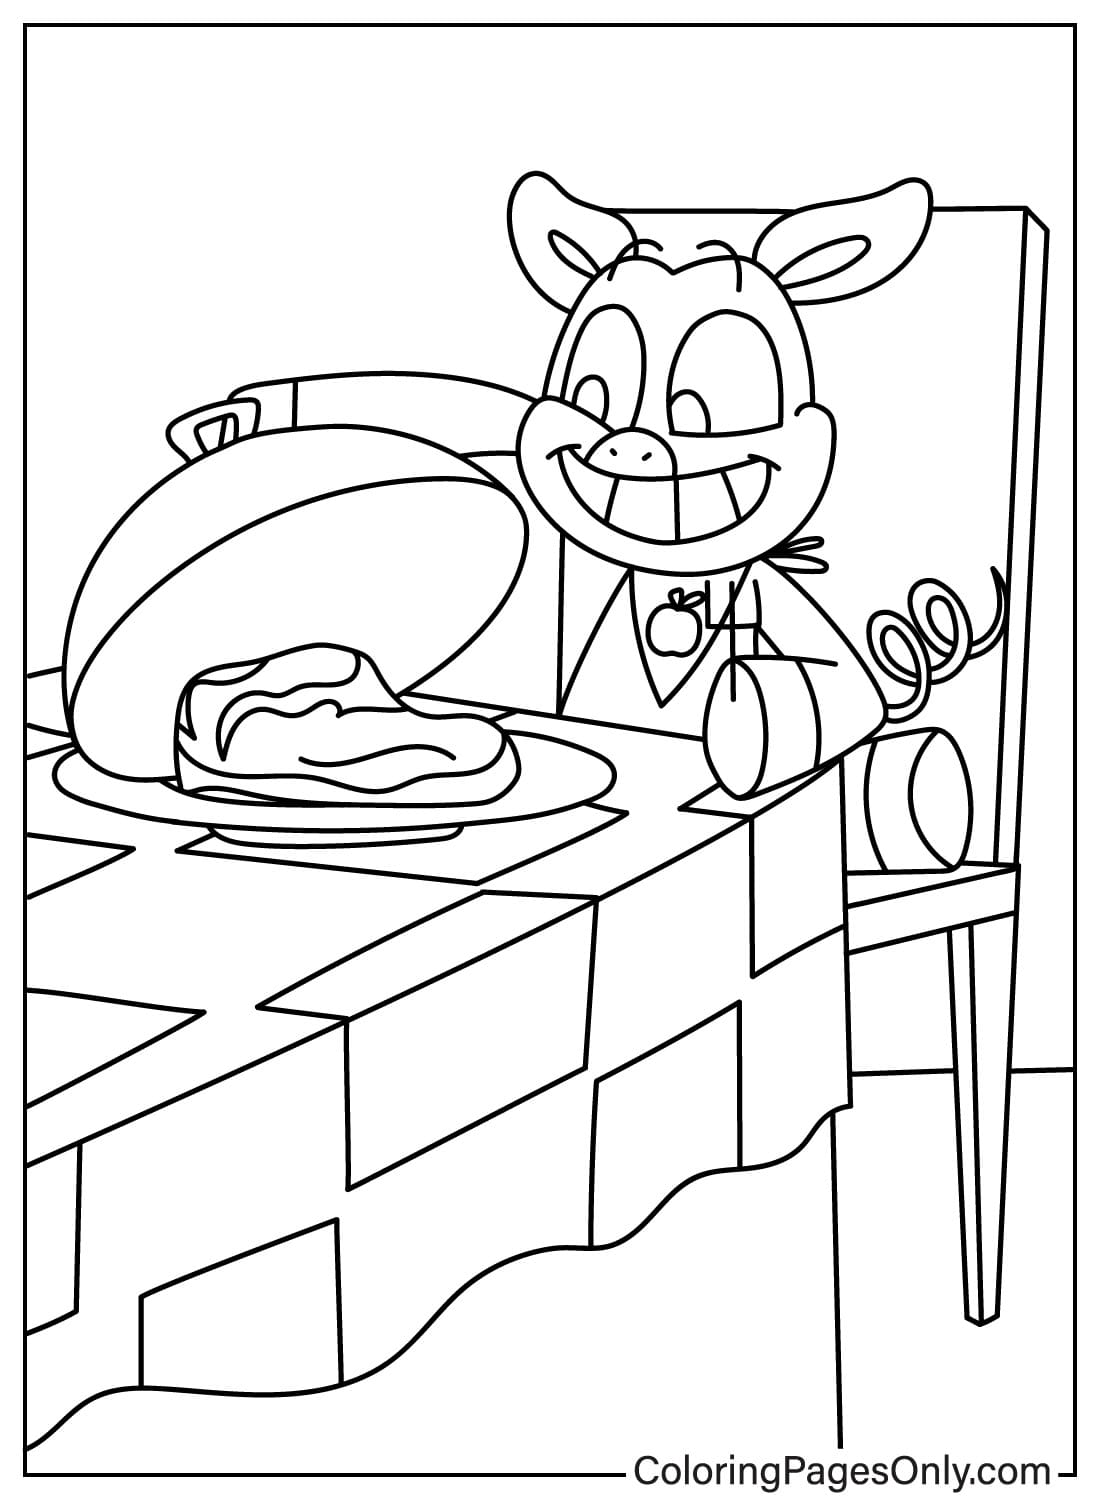 Images PickyPiggy Coloring Page from PickyPiggy